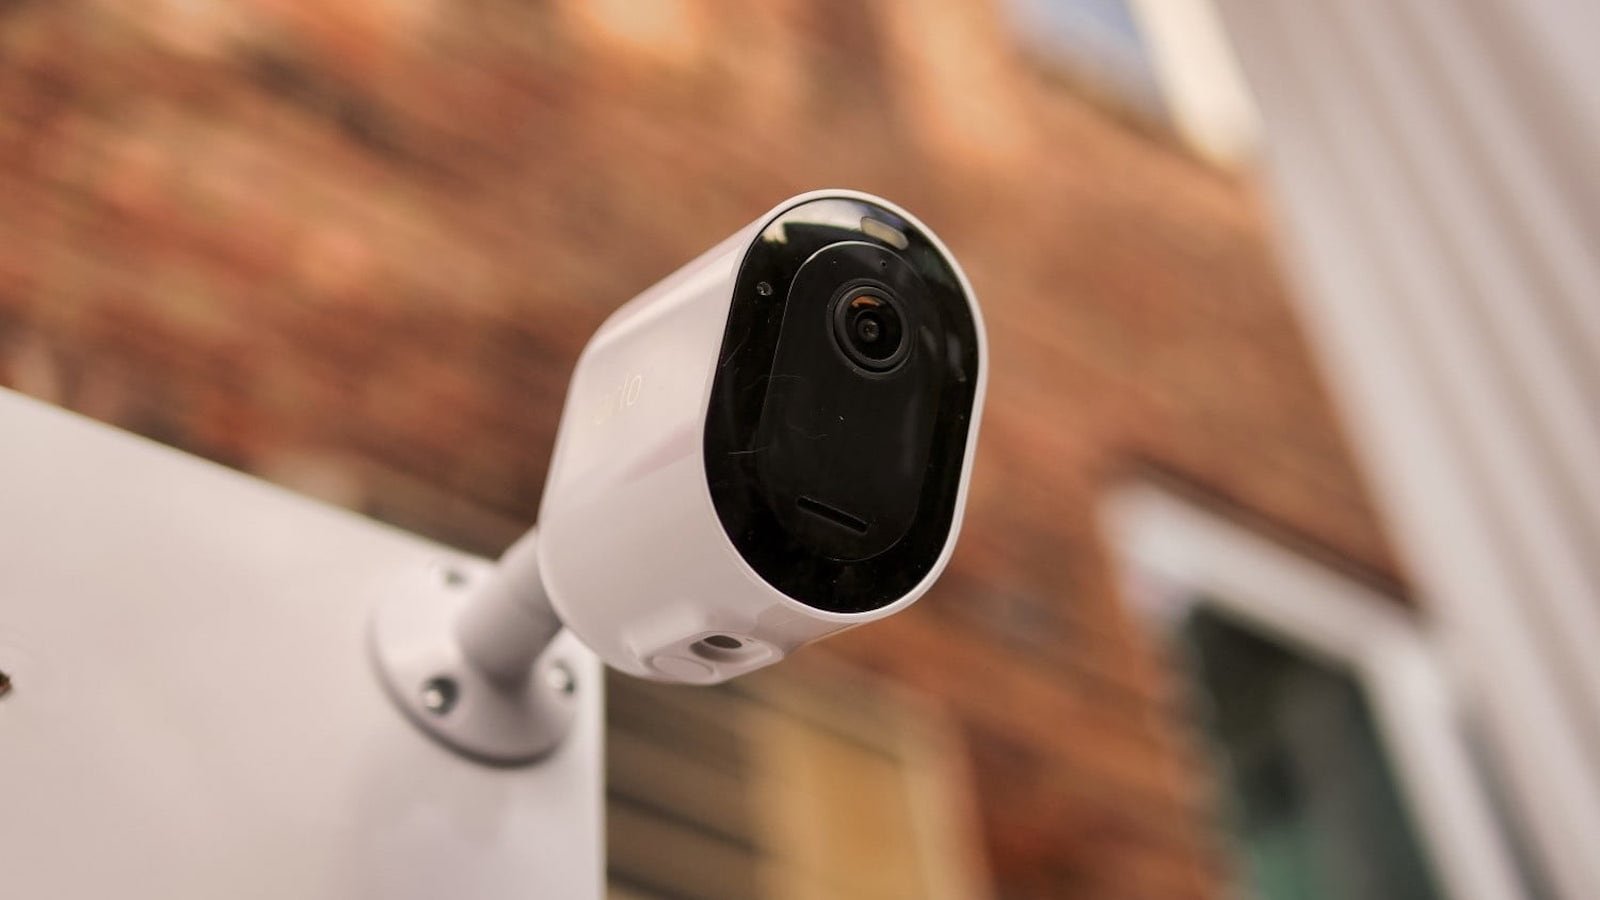 Arlo Pro 4 spotlight security camera has a built-in smart siren to deter thieves